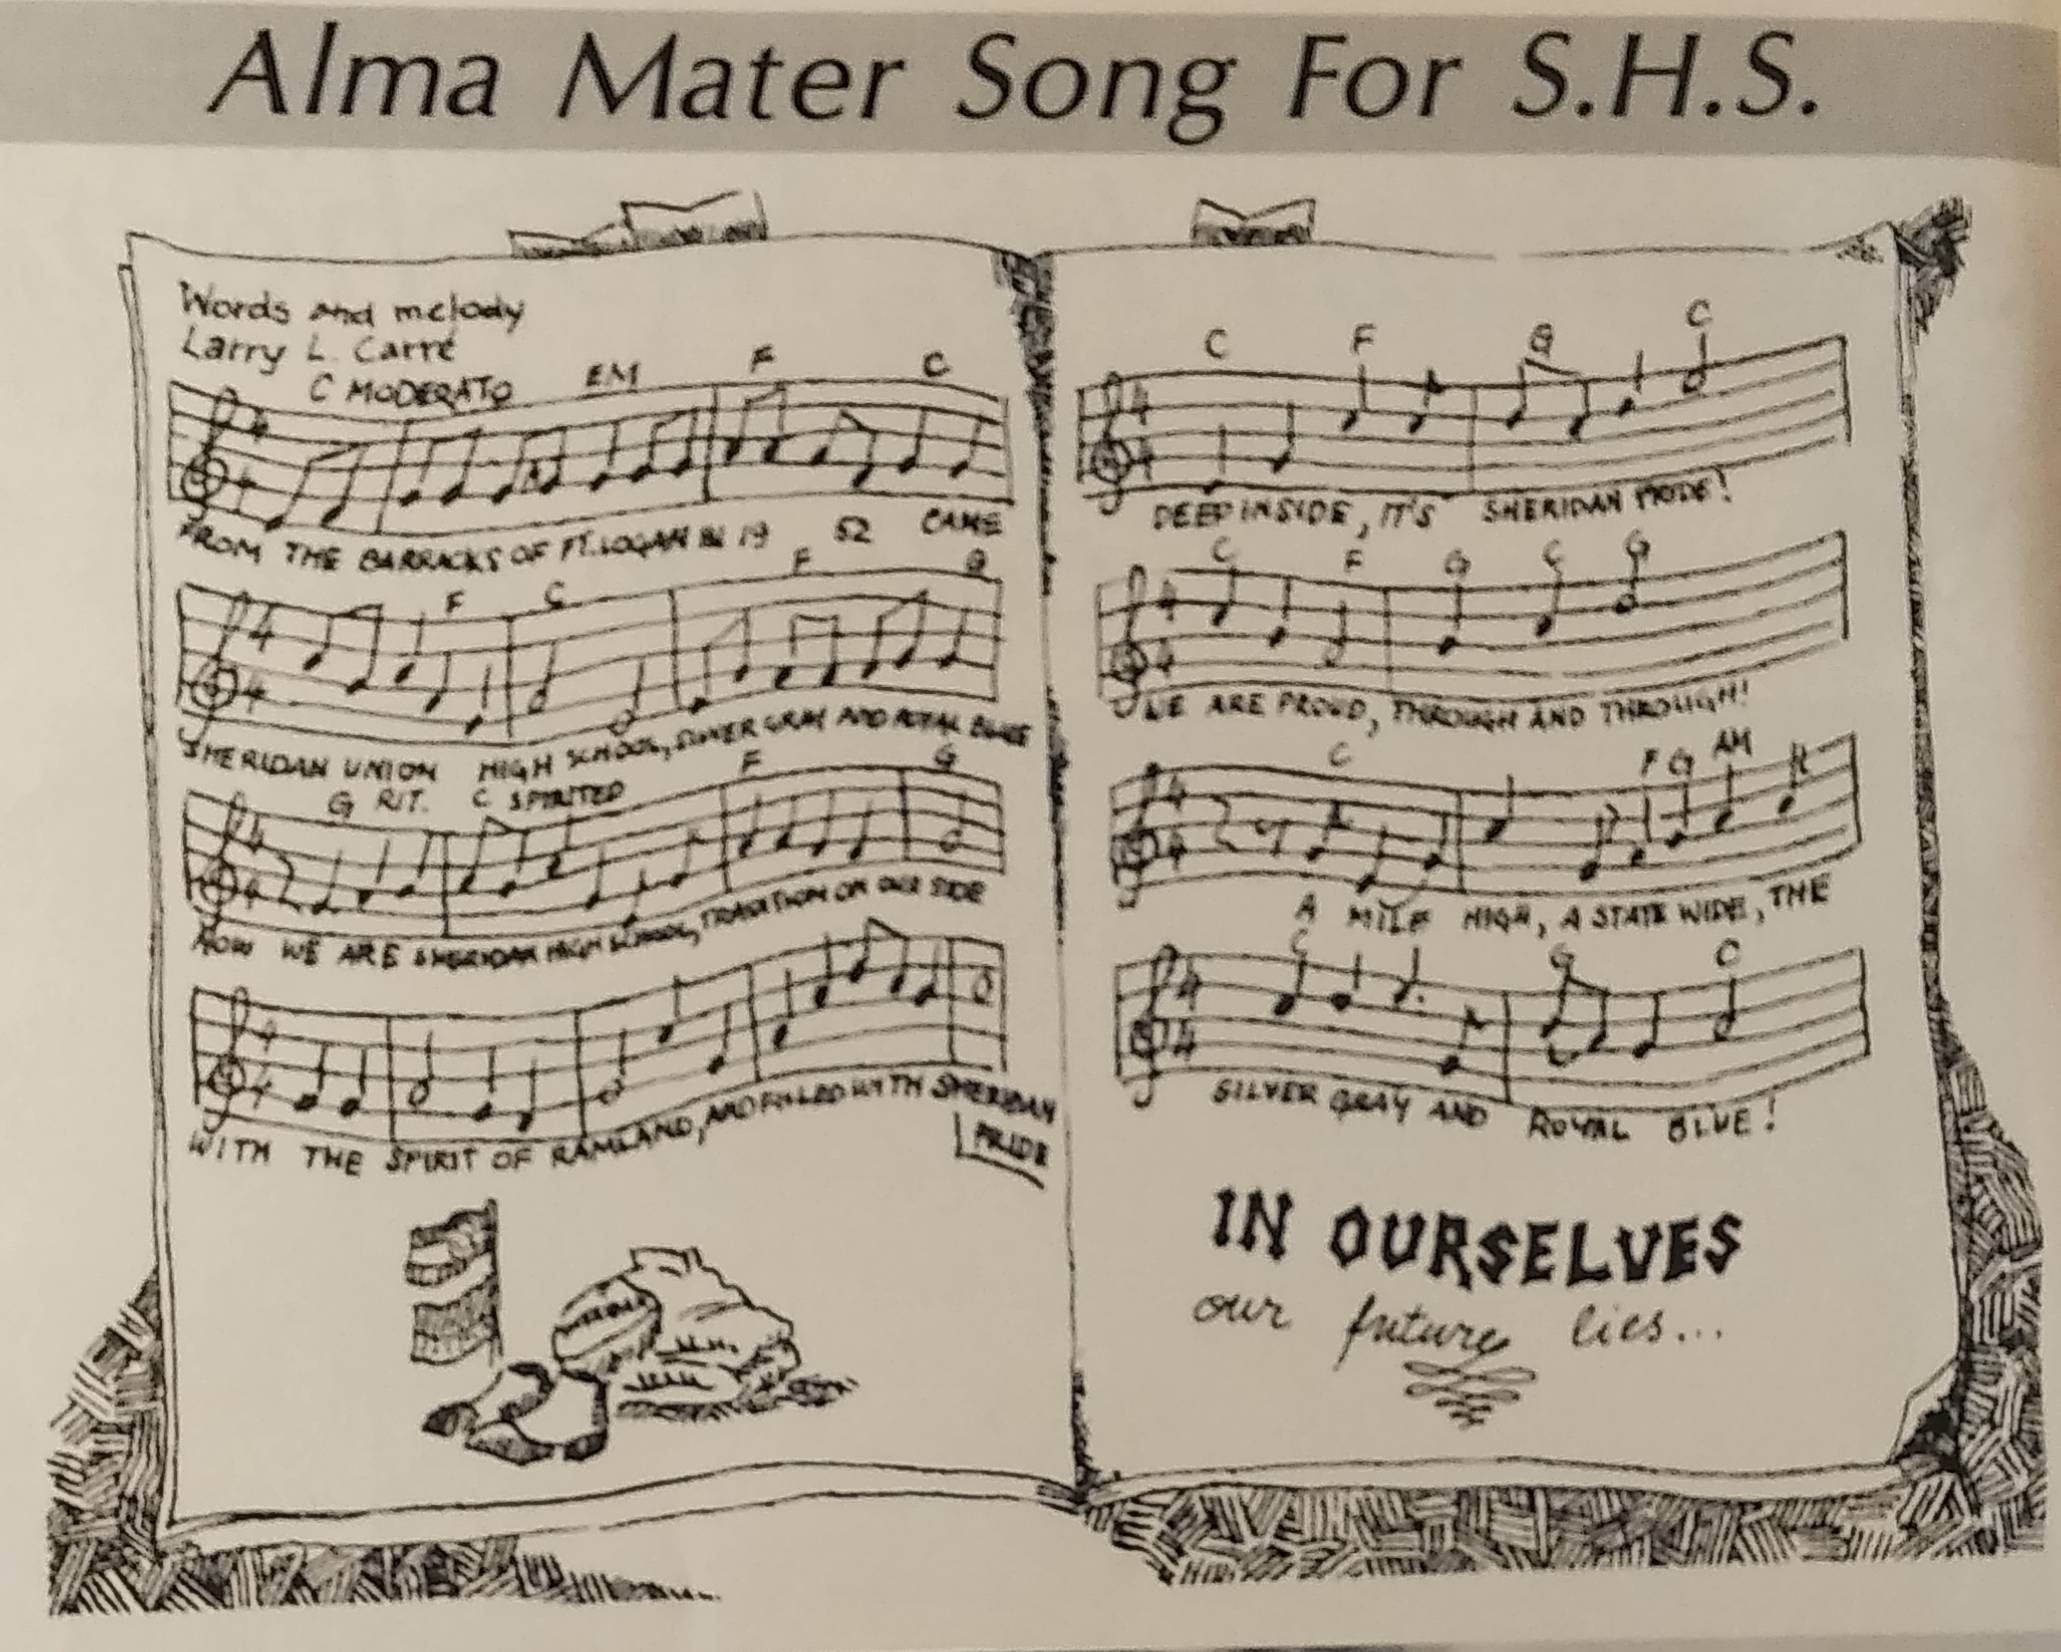 Picture from 1984 school annual of Alma Mater song.